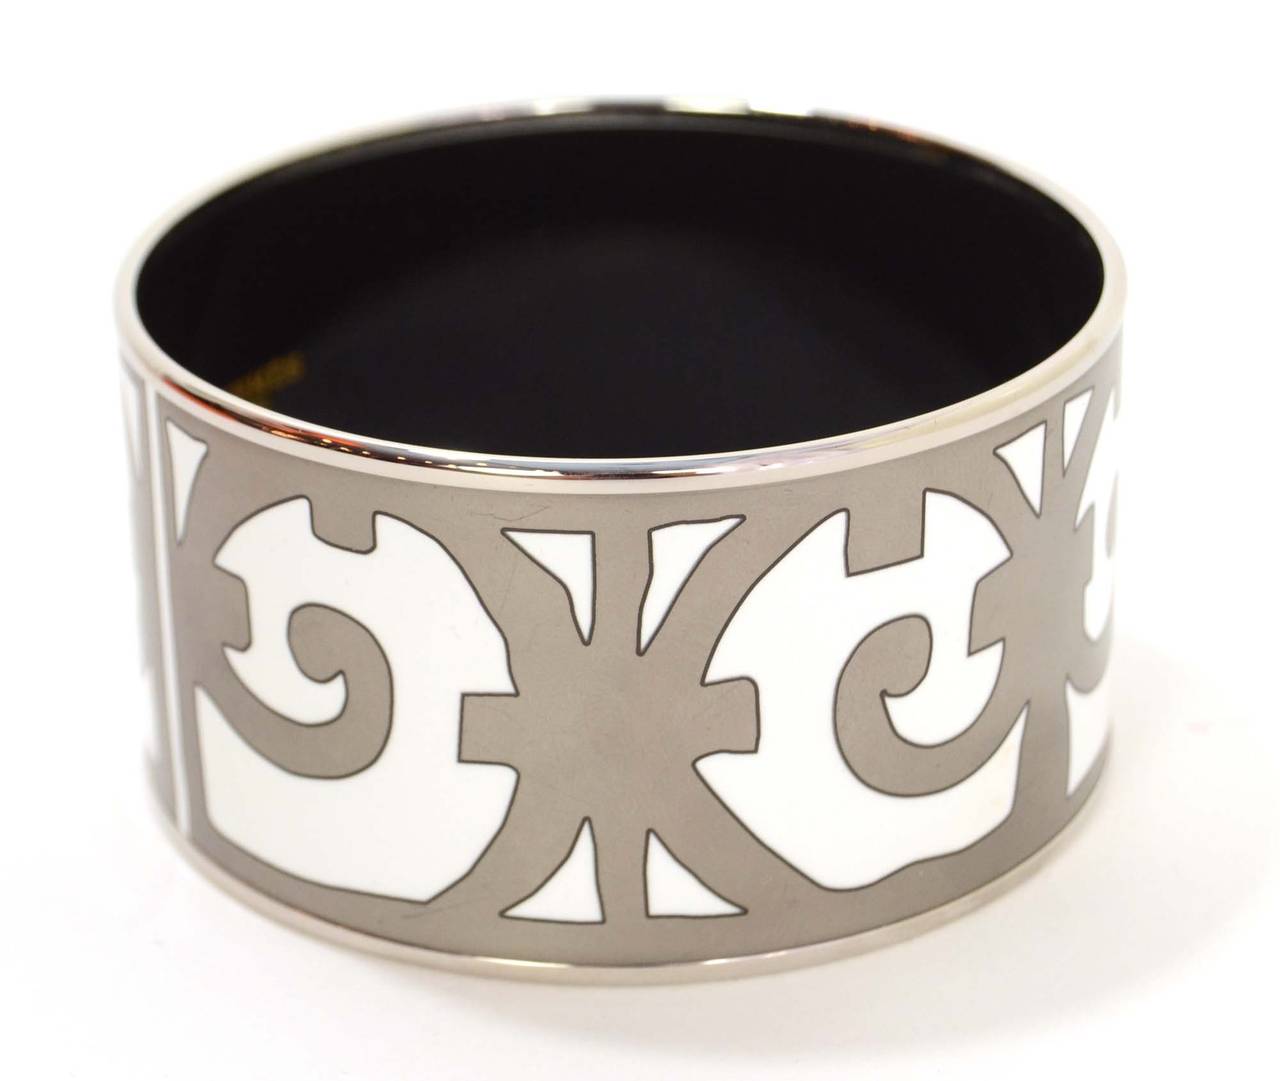 Hermes White & Silver Fleur de Lis Print Enamel Extra Wide Bangle
Made in: France
Stamp: Made in France +O
Closure: None
Color: White, silver and black
Materials: Metal and enamel
Overall Condition: Excellent with the exception of some